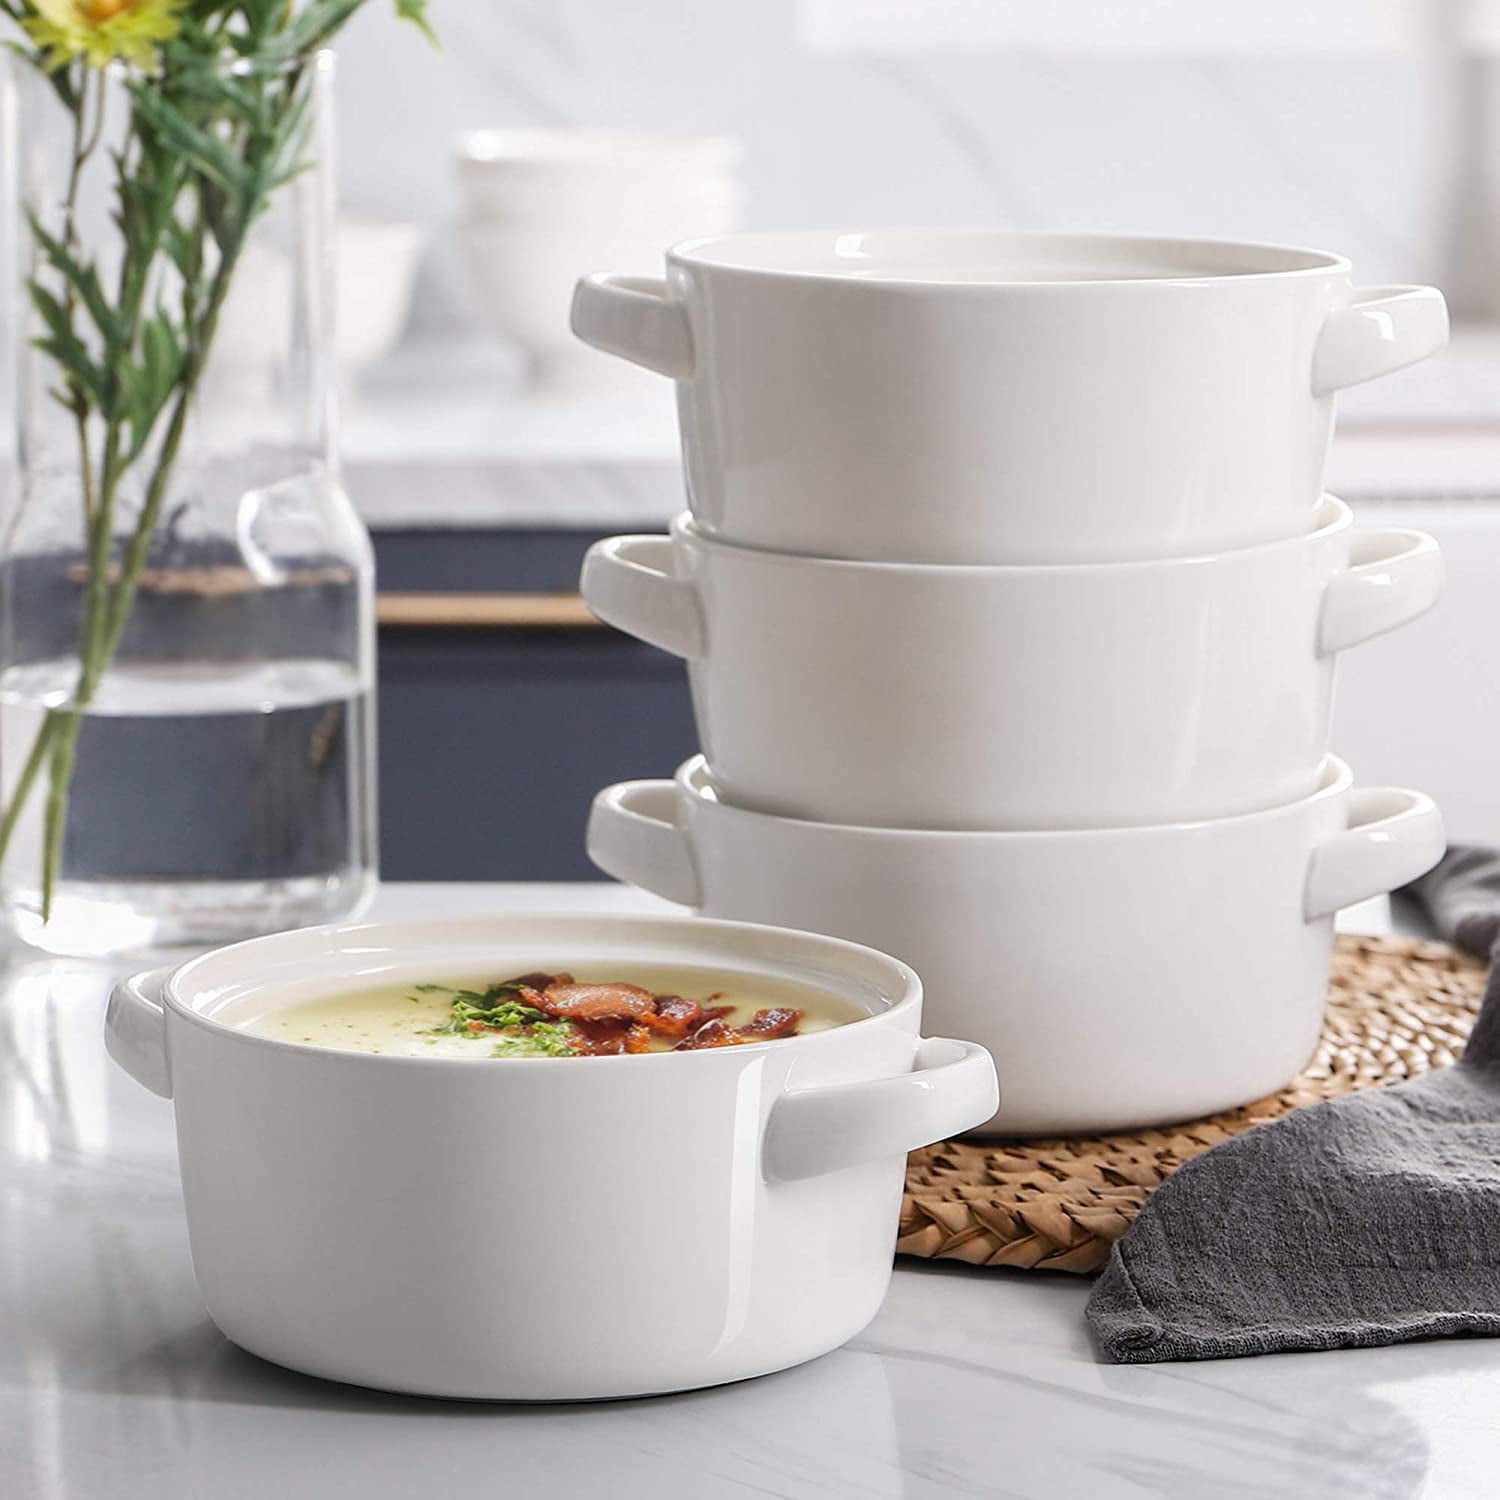 Hand DOWAN 24 Ounces Soup Bowls with Handles White Bowls Microwave & Oven Safe 